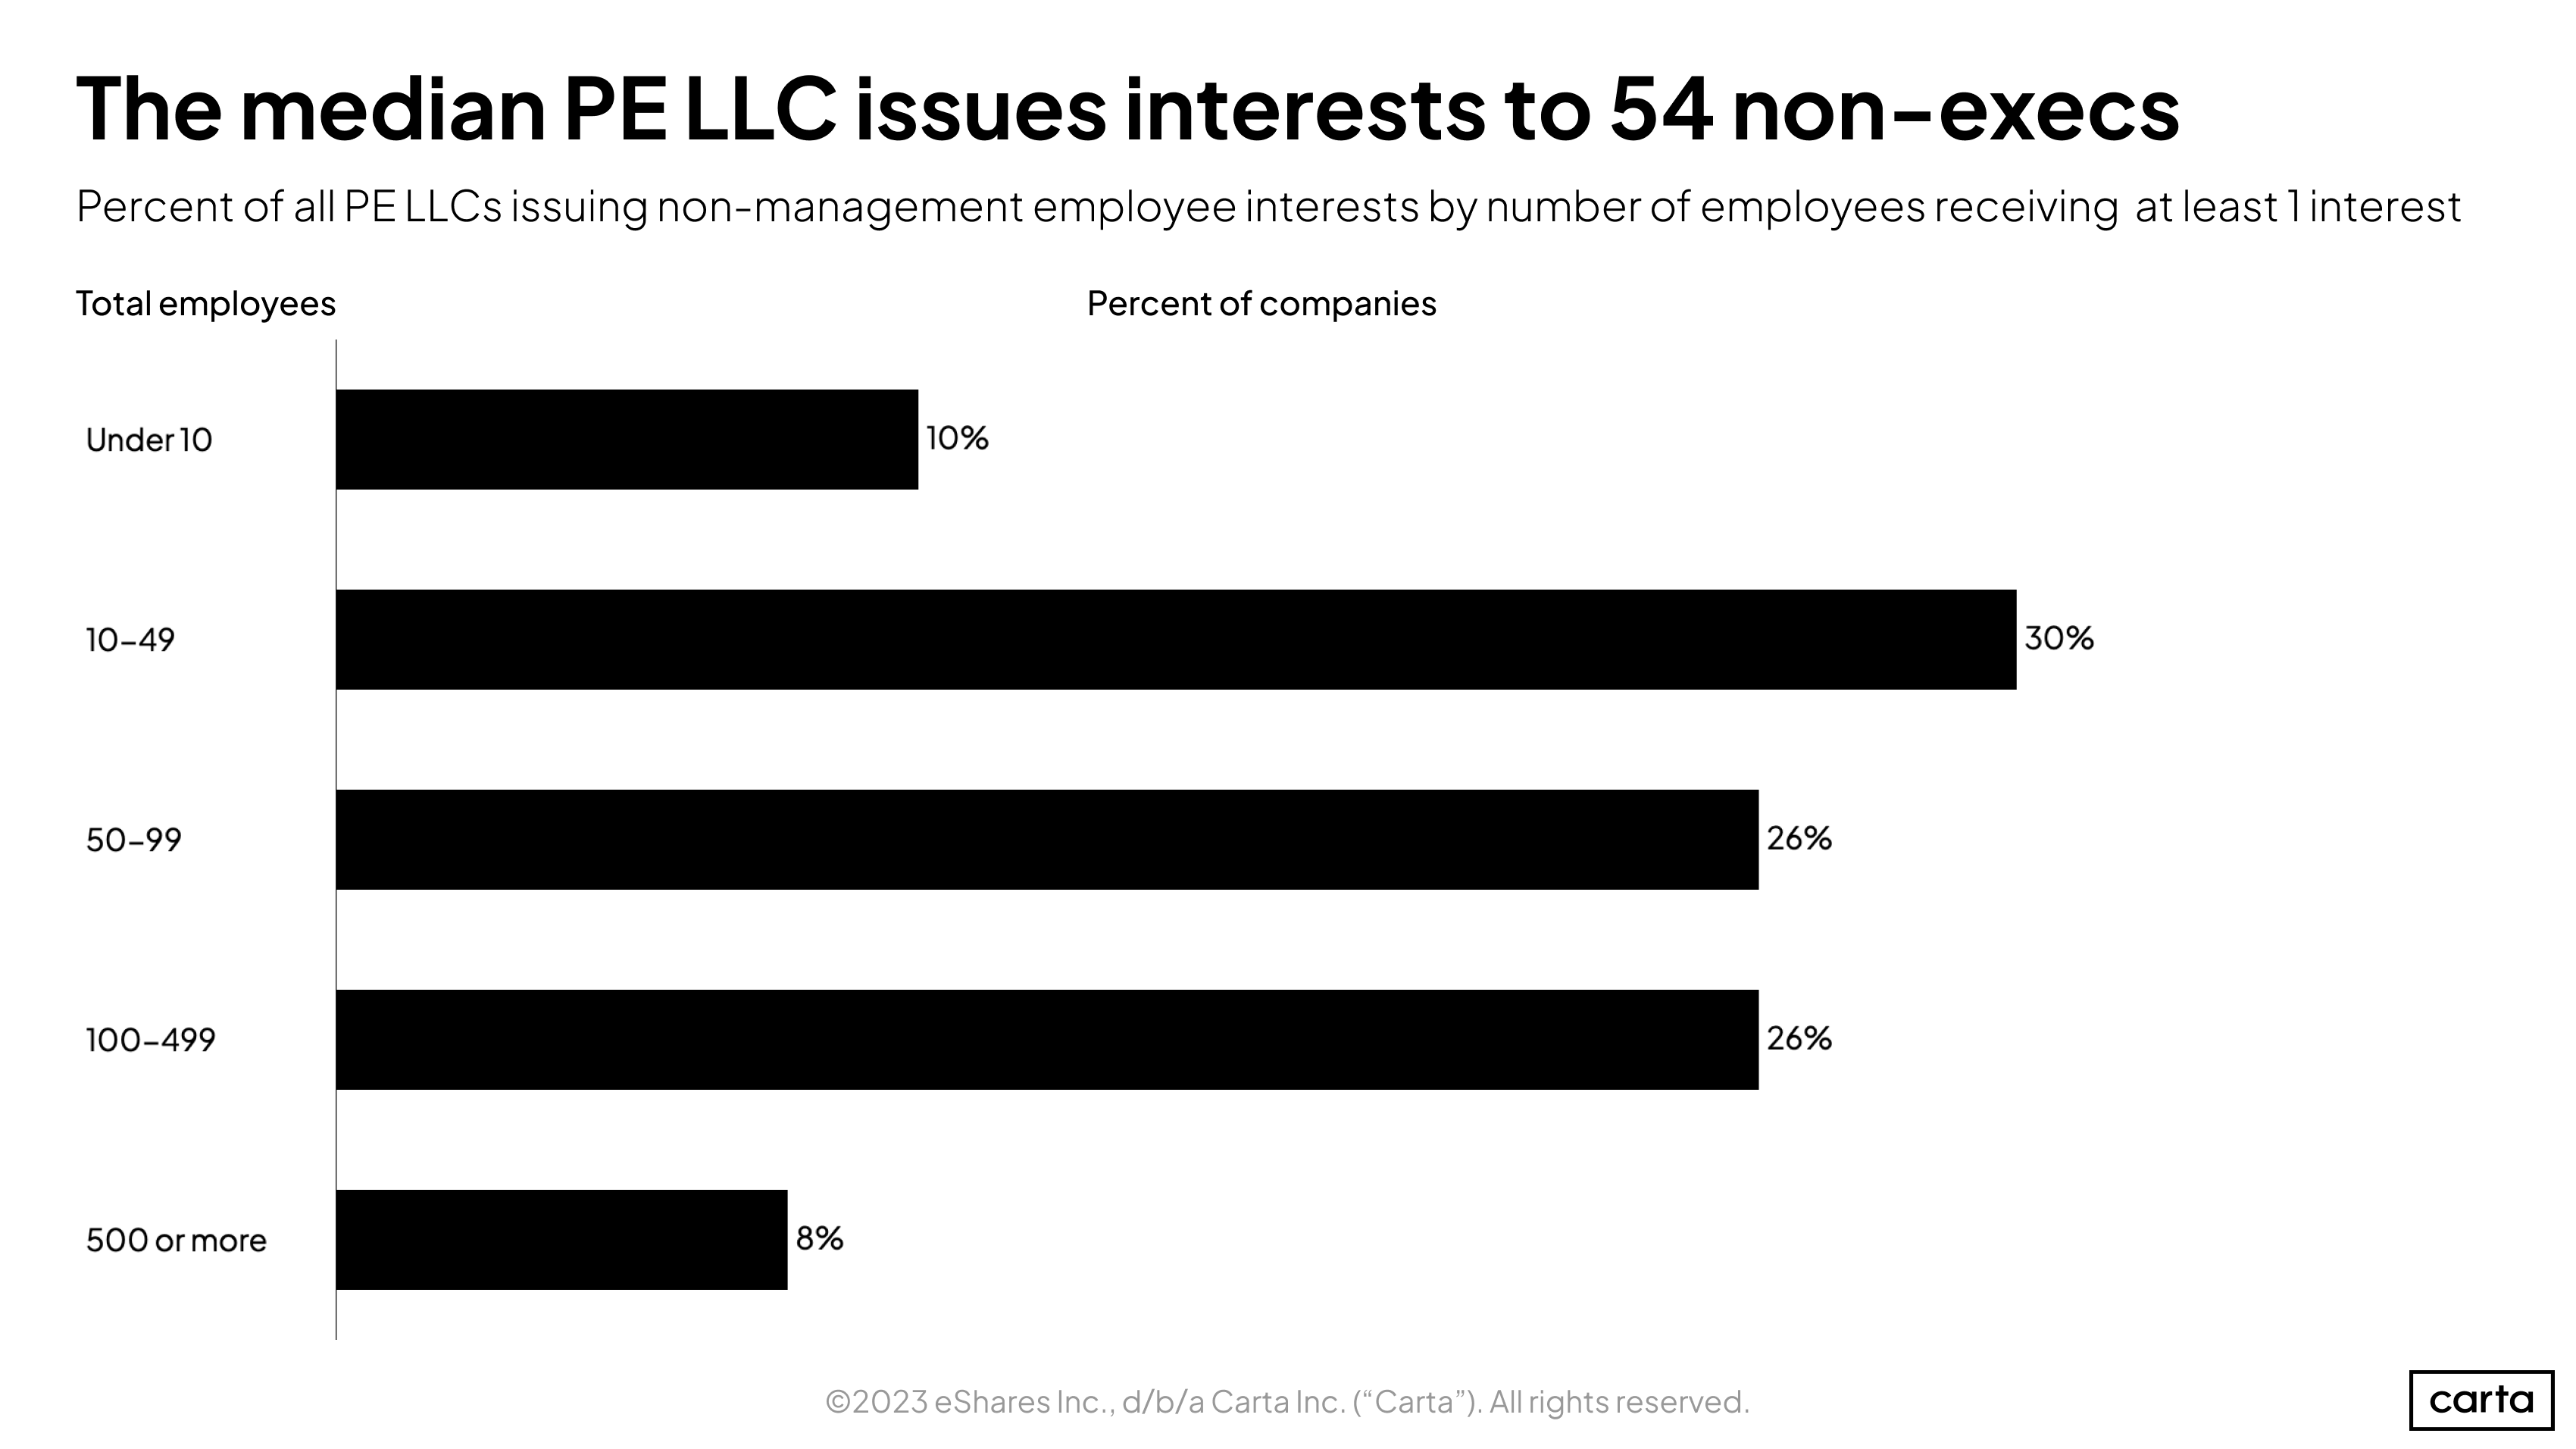 The median PE LLC issues interests to 54 non-execs